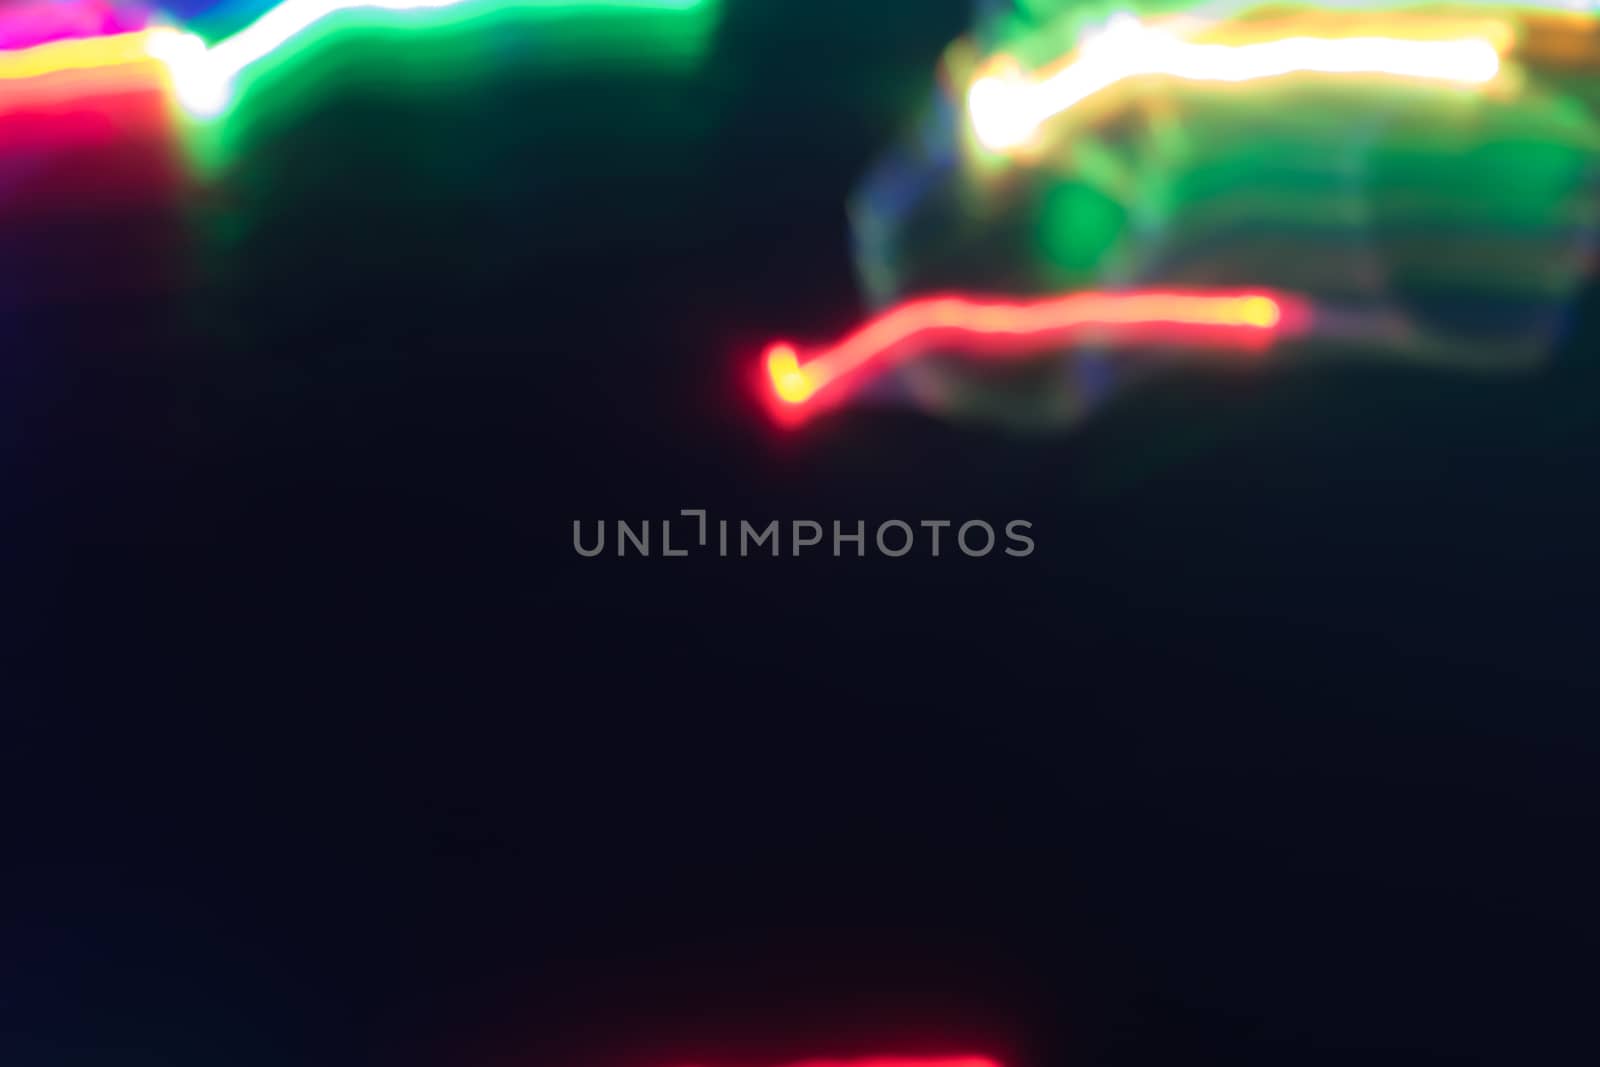 futuristic abstract glowing background resembling motion blurred neon light curves, abstract background